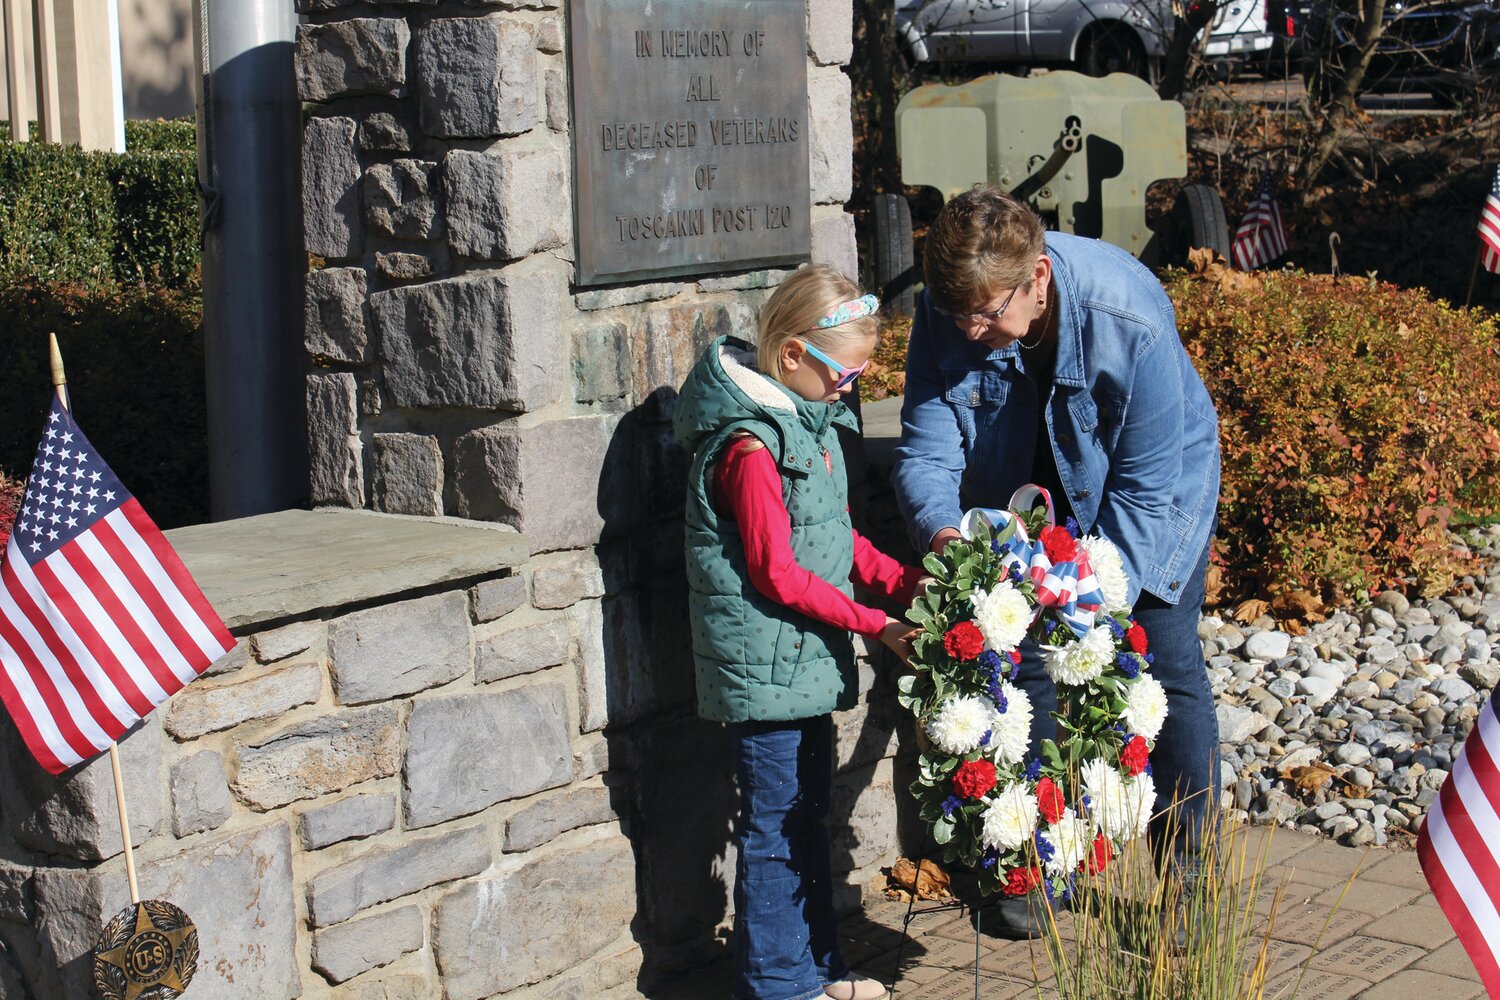 Kathy Miller, auxiliary president, and Annabelle Miller, junior auxiliary member, place a memorial wreath during the Veterans Day ceremony in Lambertville, N.J.